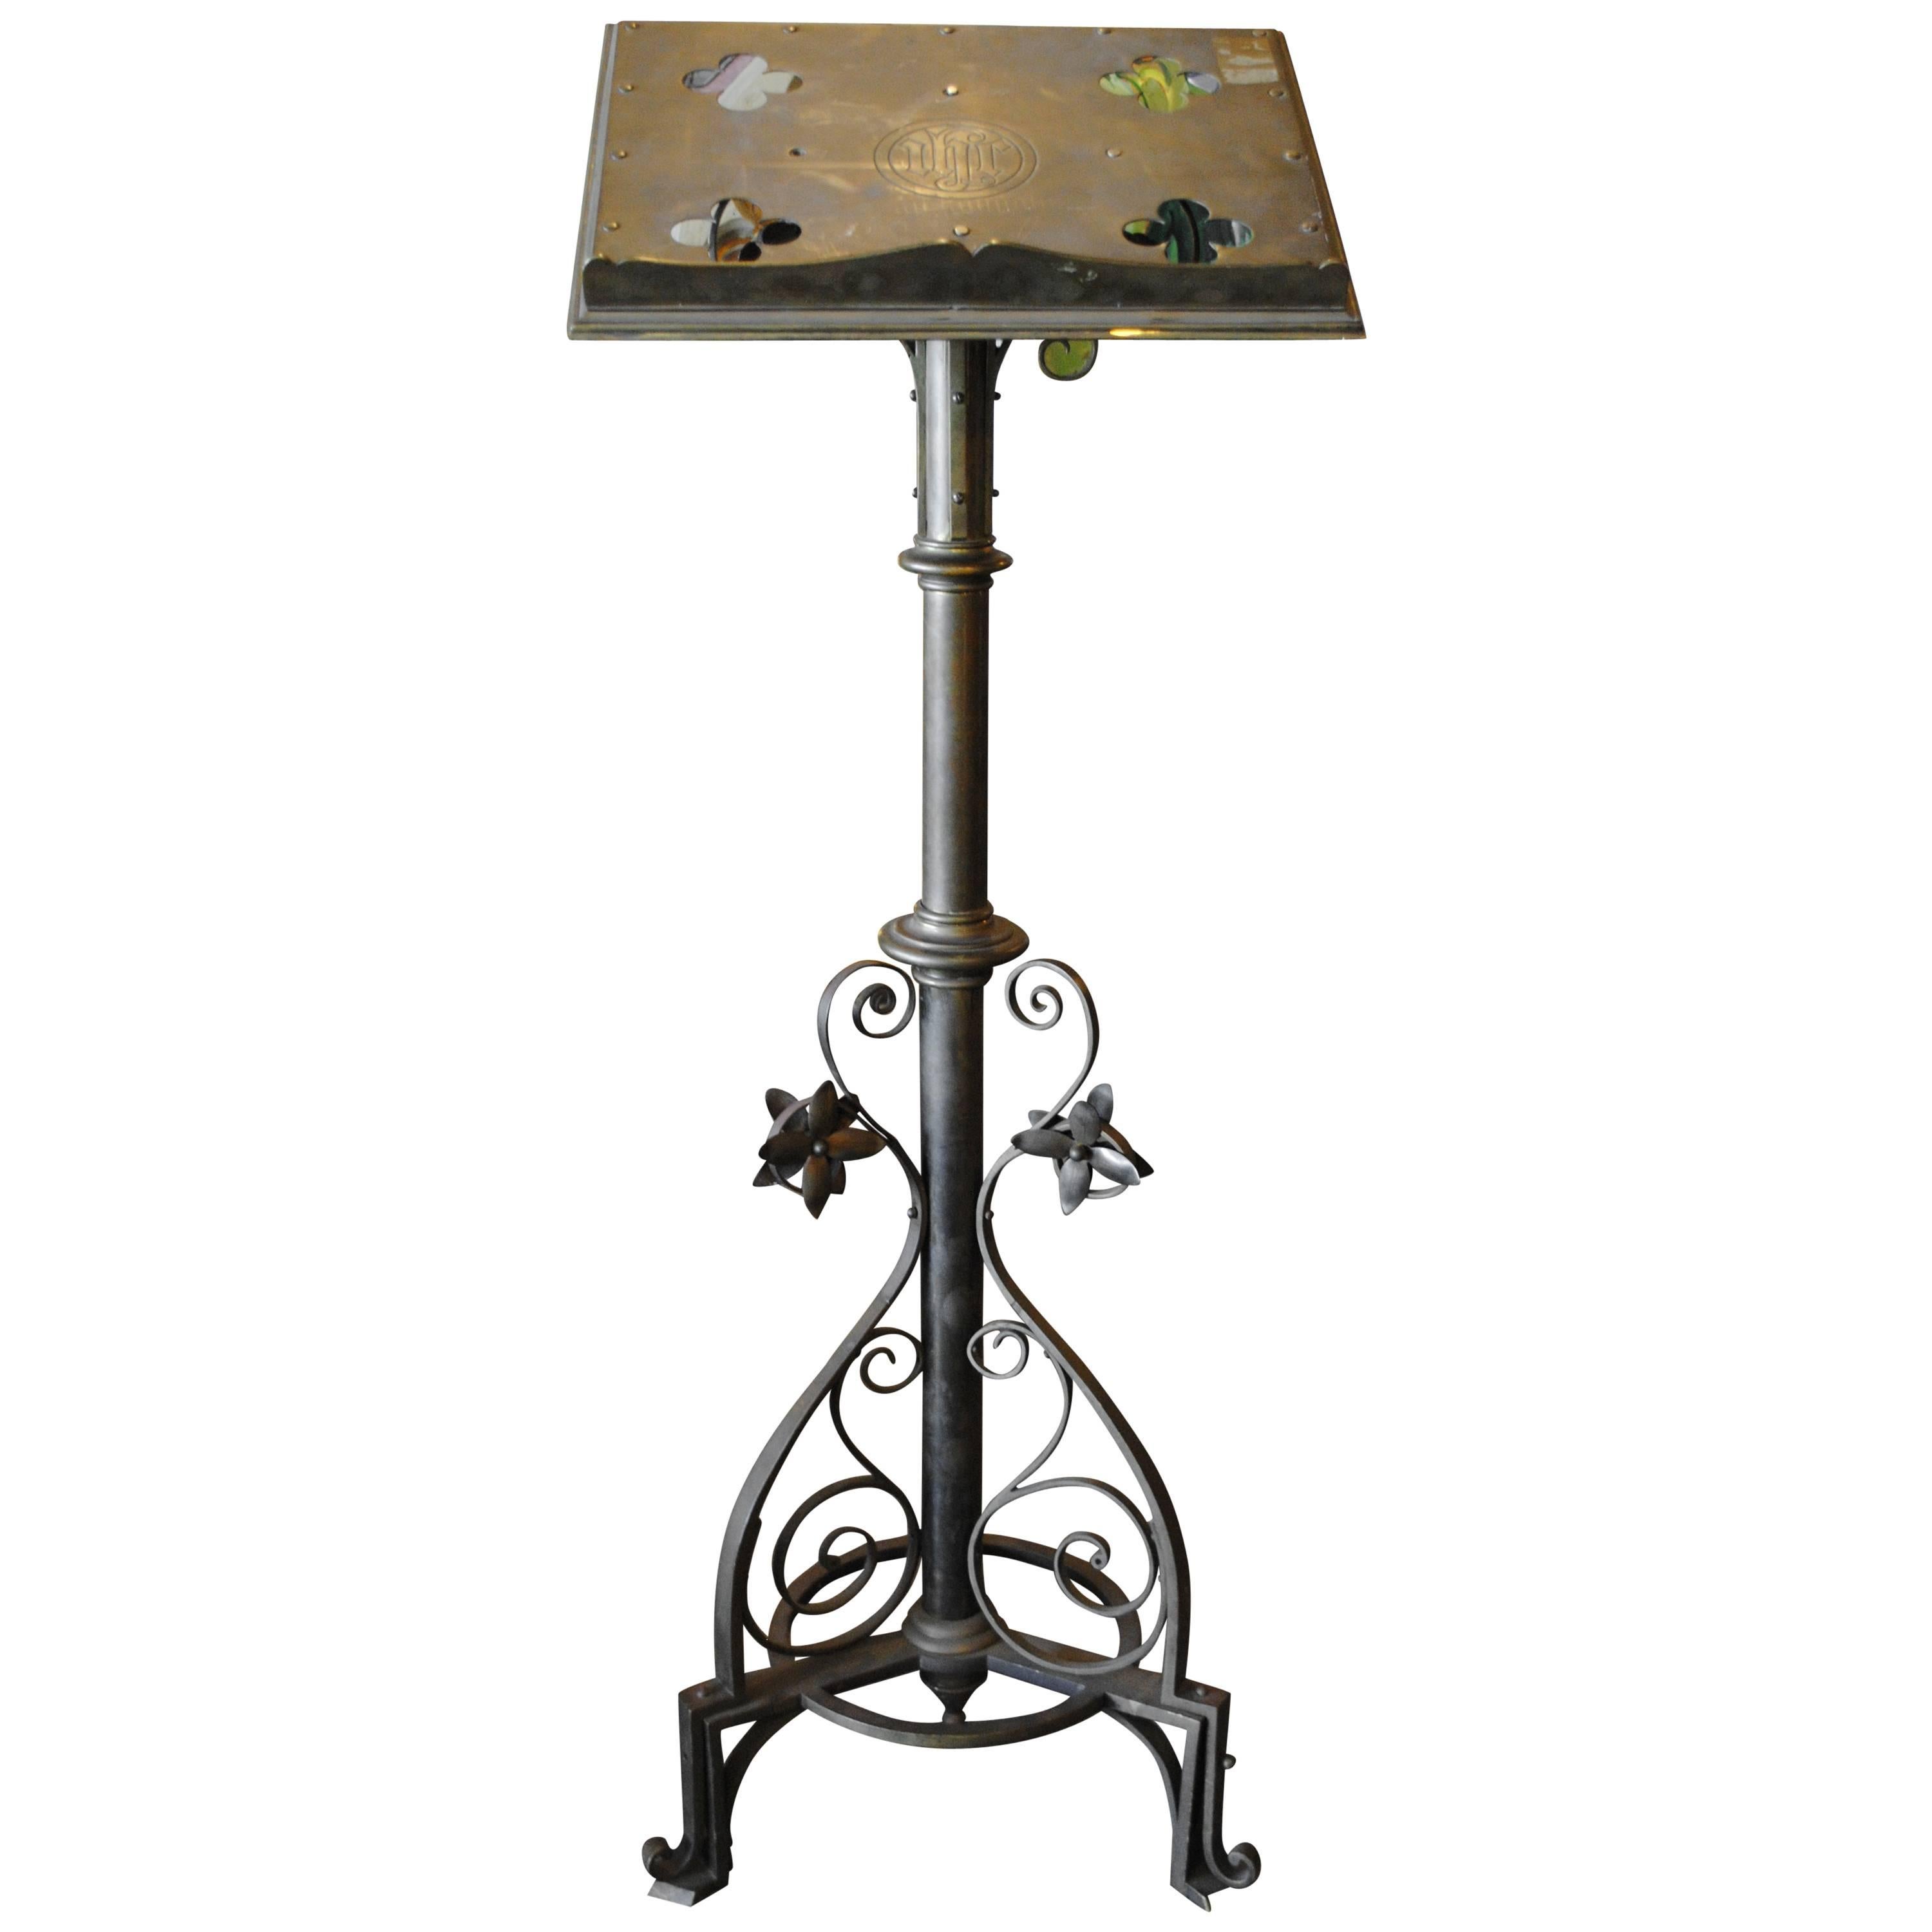 Jones & Willis Brass Religious Lectern or Music Stand For Sale